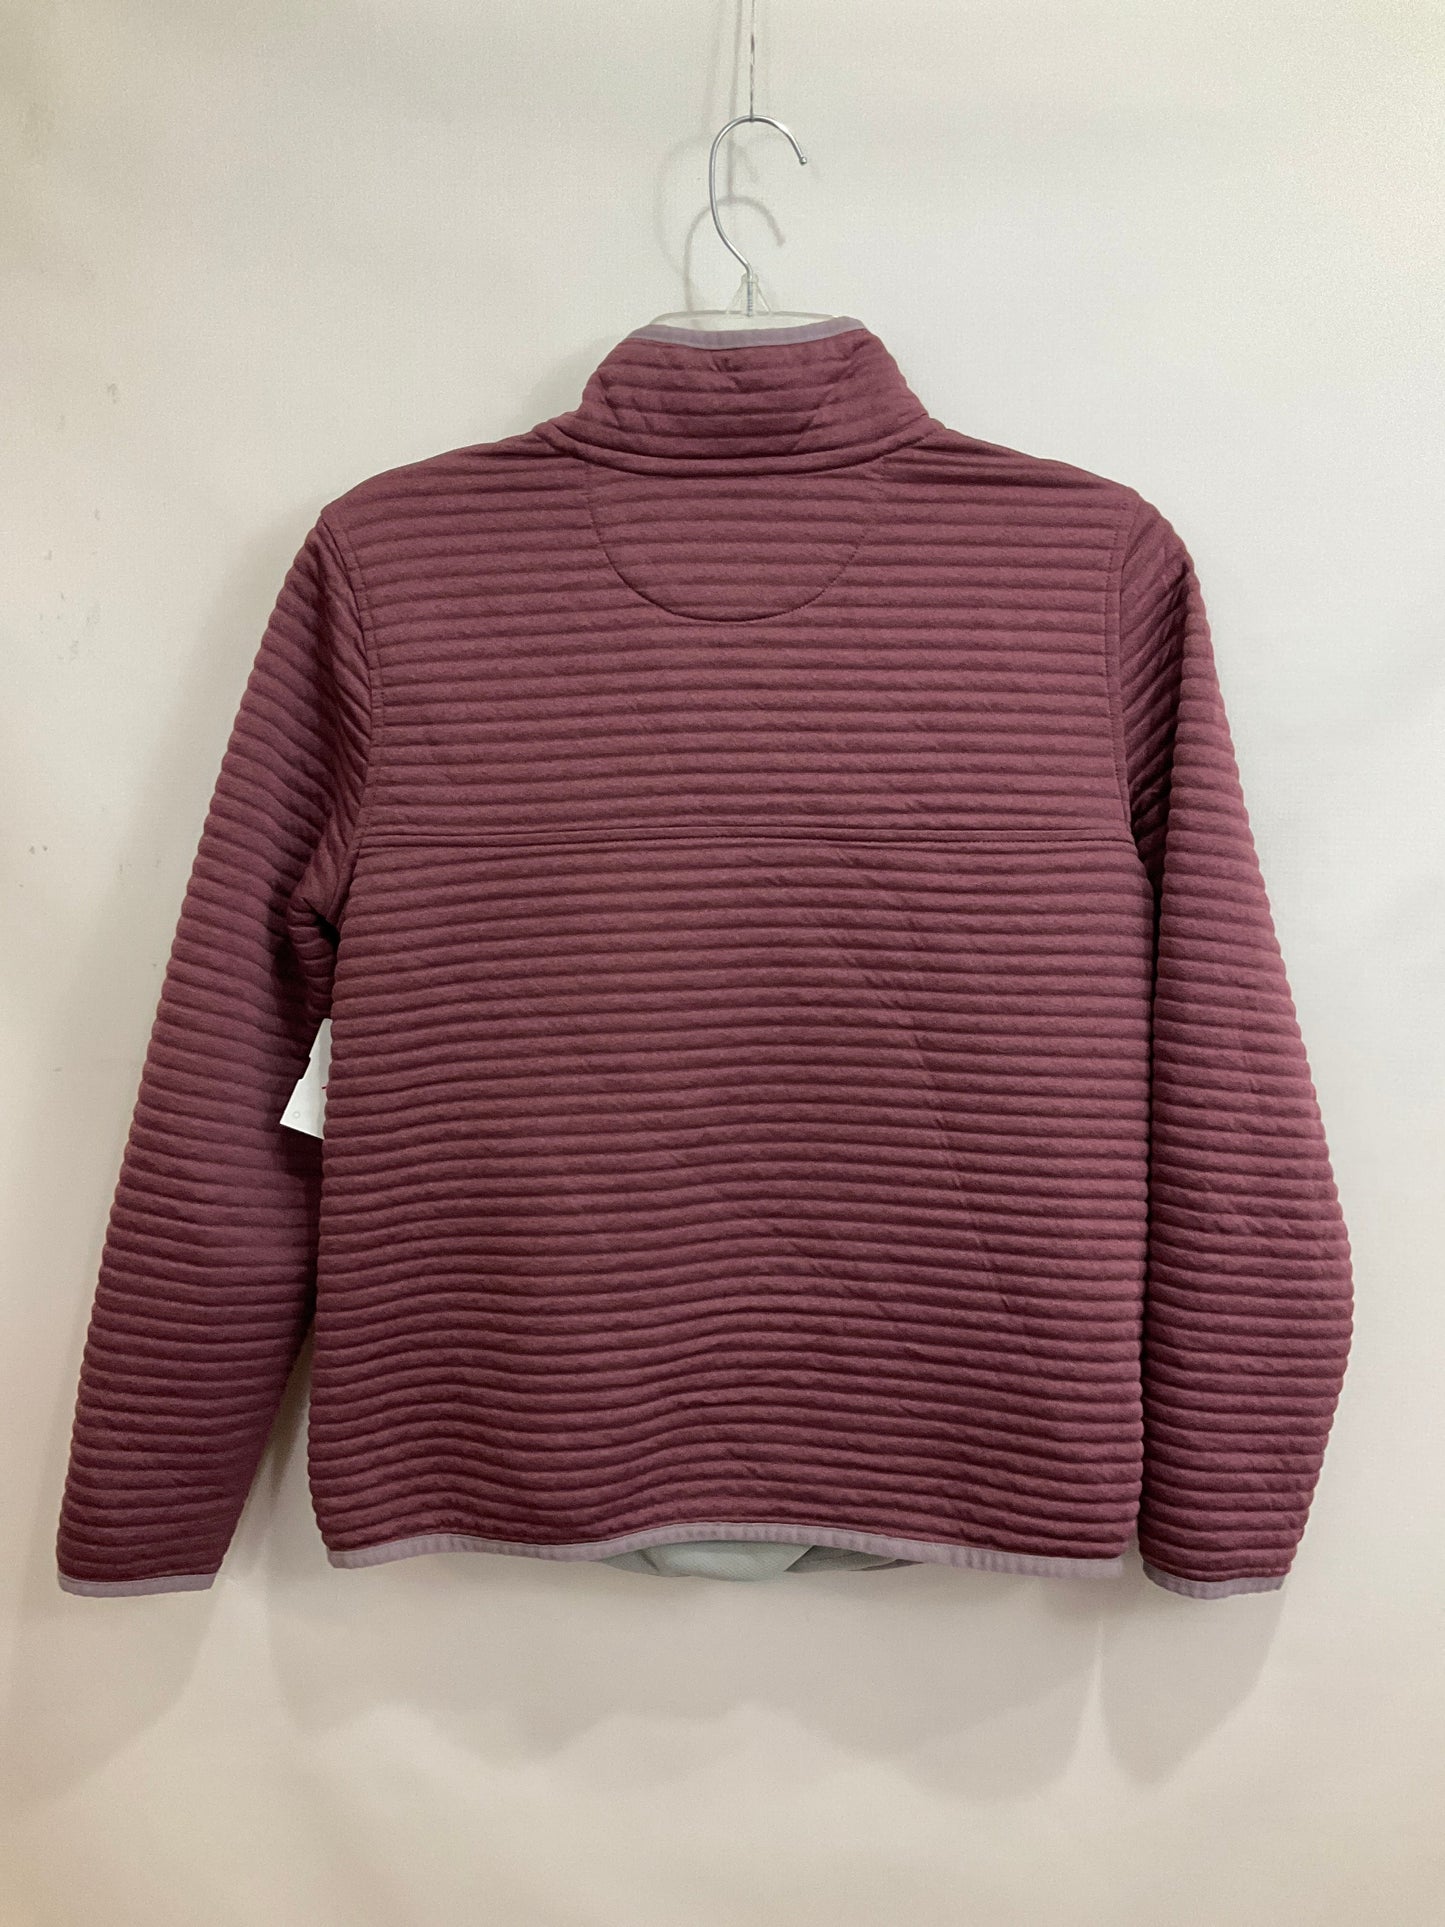 Athletic Top Long Sleeve Collar By Ll Bean  Size: S